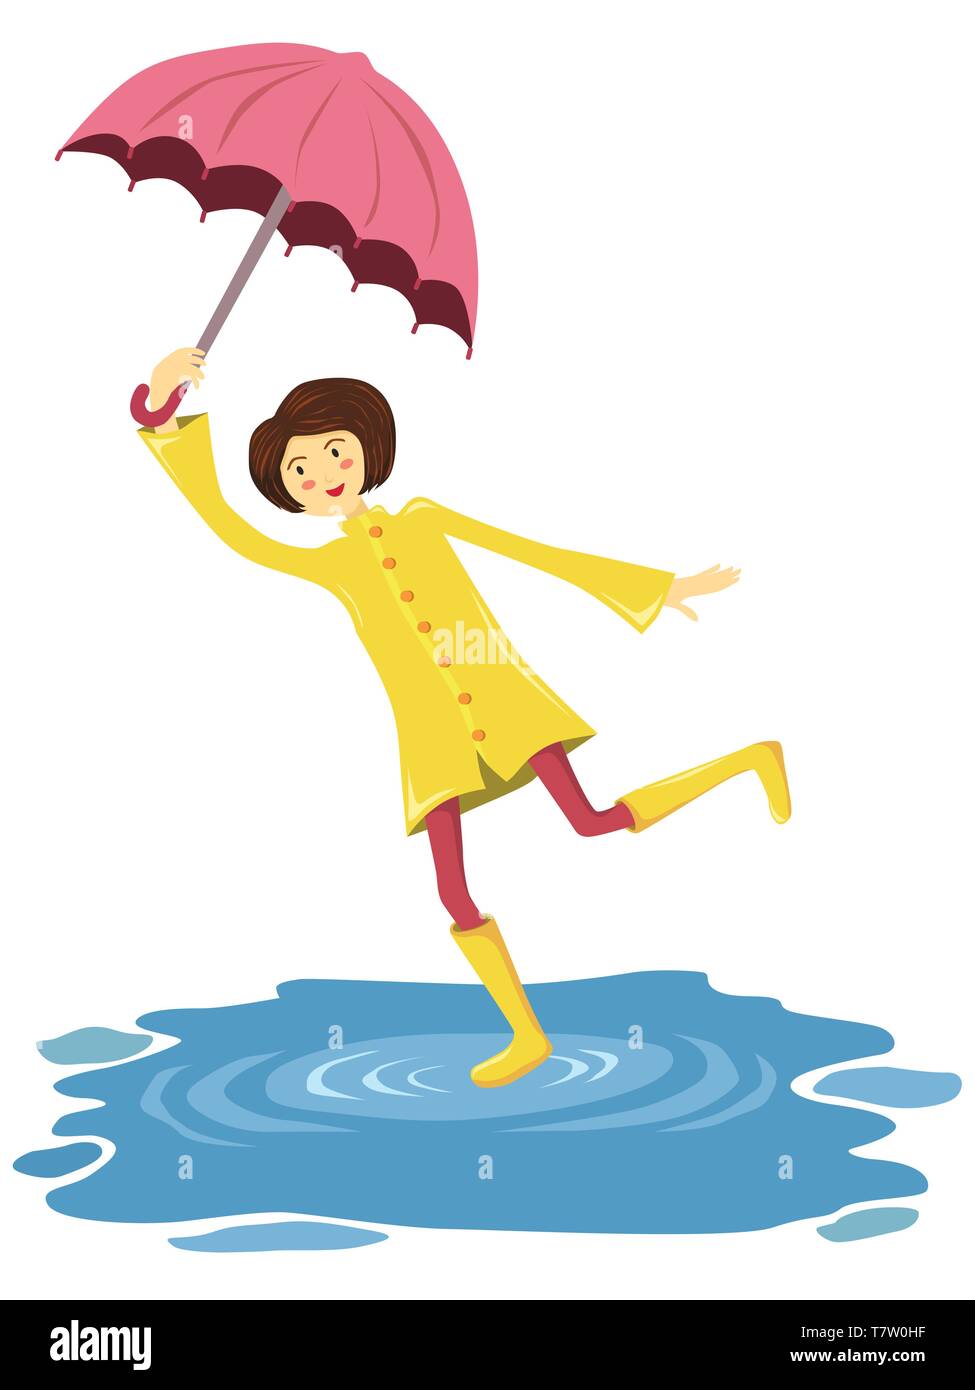 Girl dancing with yellow raincoat, boots and her pink umbrella on puddle after rain Stock Vector